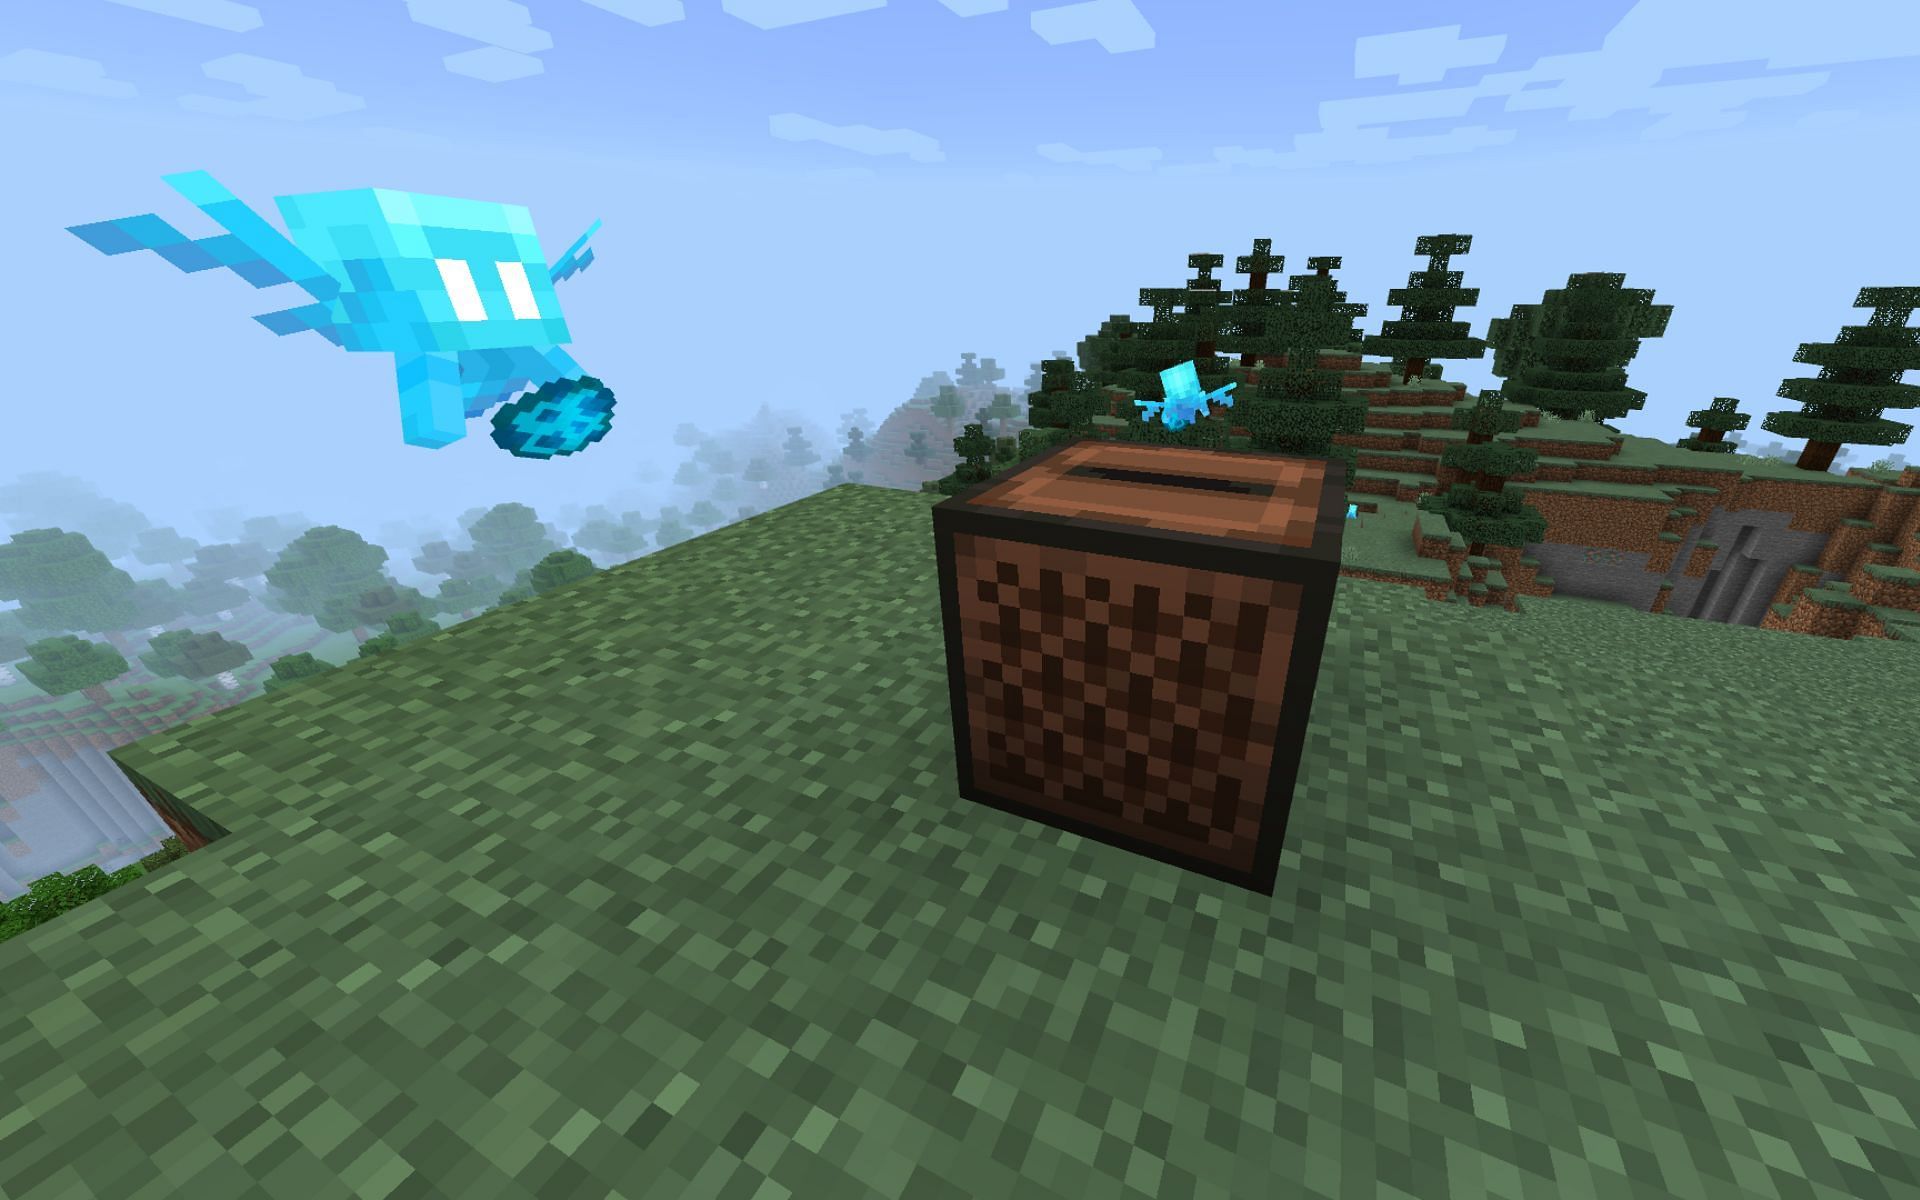 Allays received major changes with the latest update (Image via Minecraft 1.19.10 update)